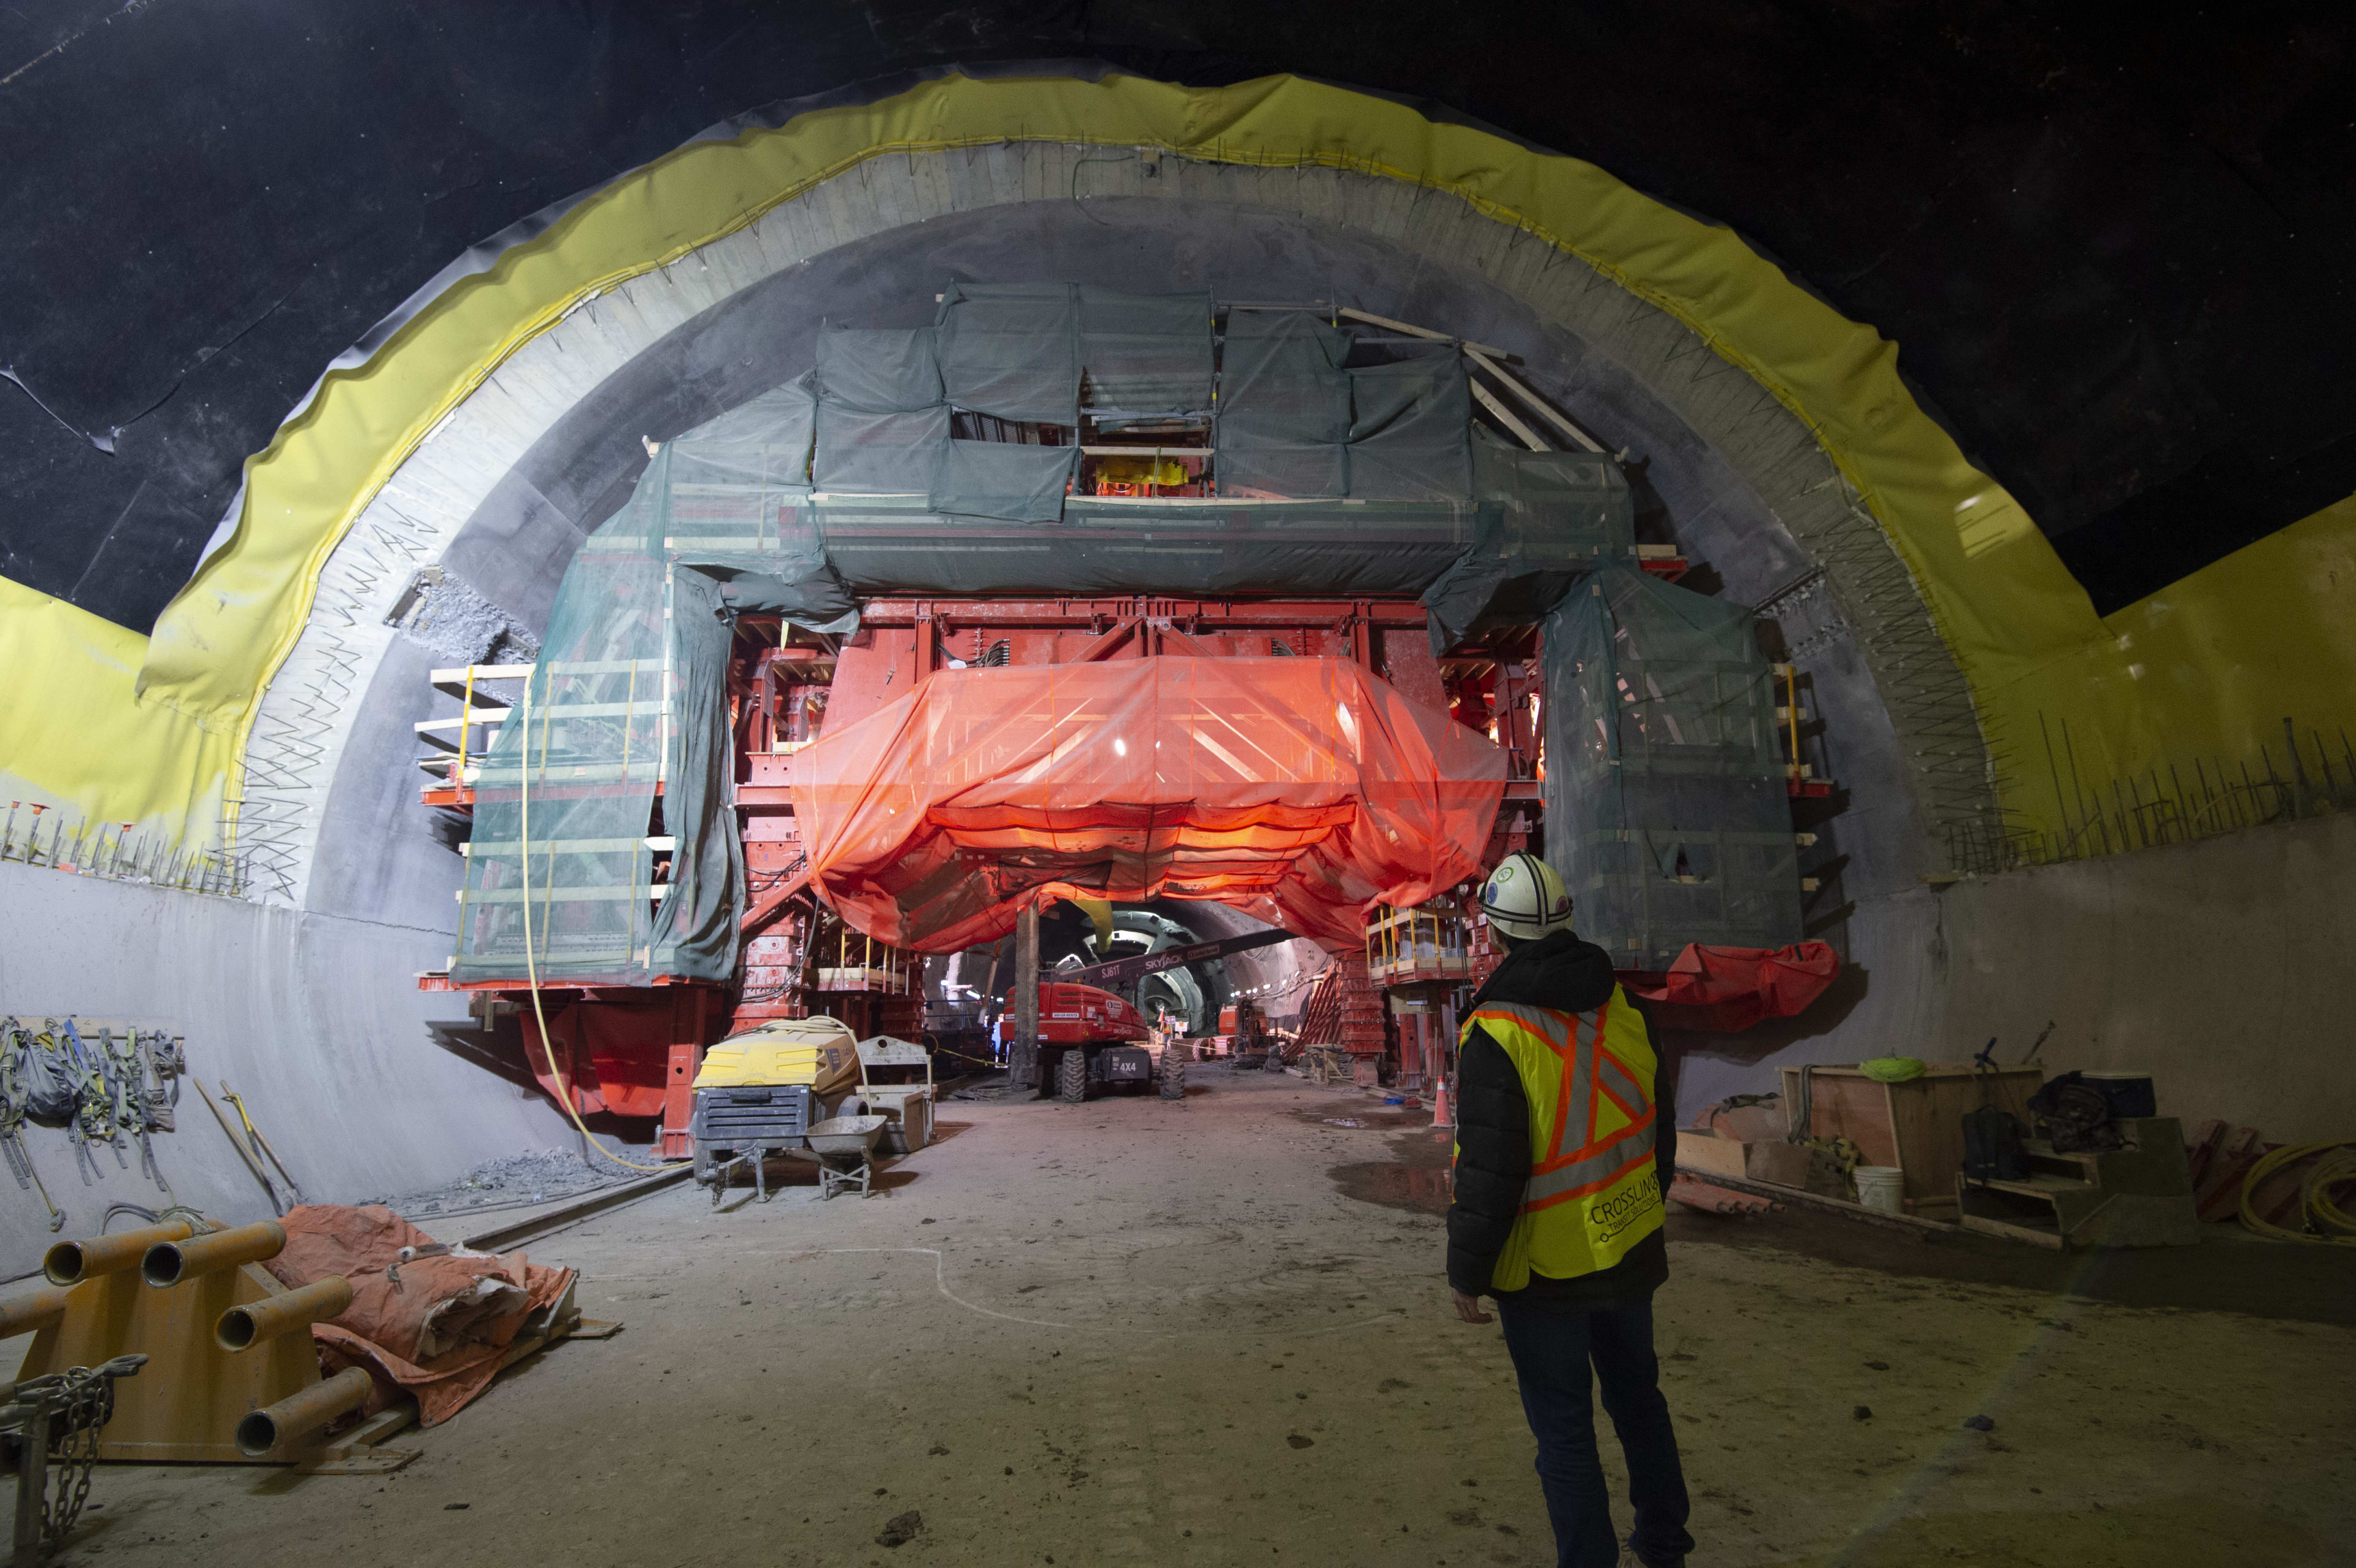 A workman looks at a large concrete tunnel, with equipment working inside.